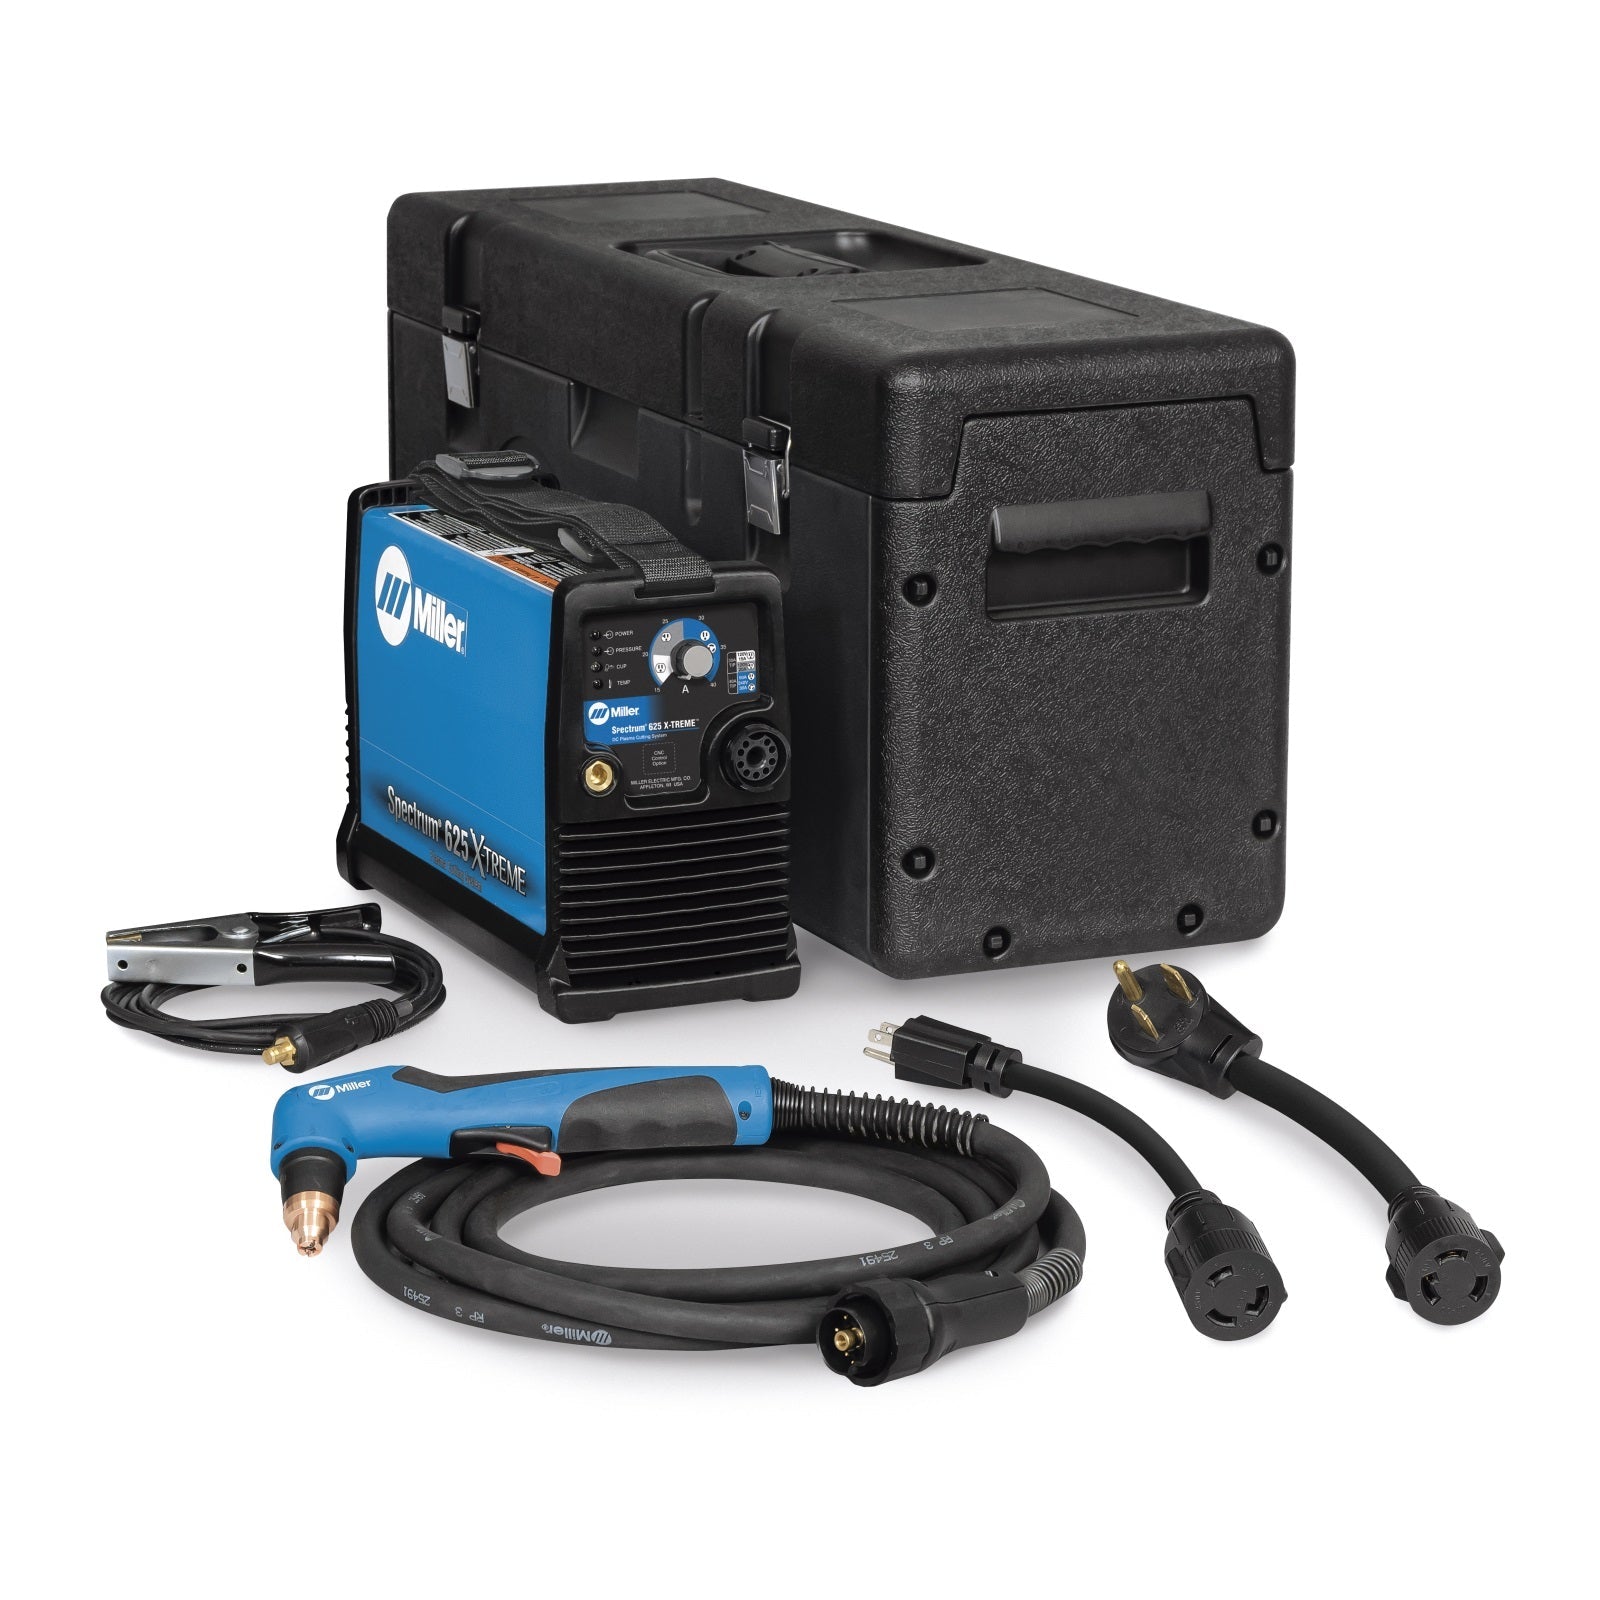 Miller Spectrum 625 X-Treme Plasma Cutter with 12 ft. Torch and Accessories (907579)